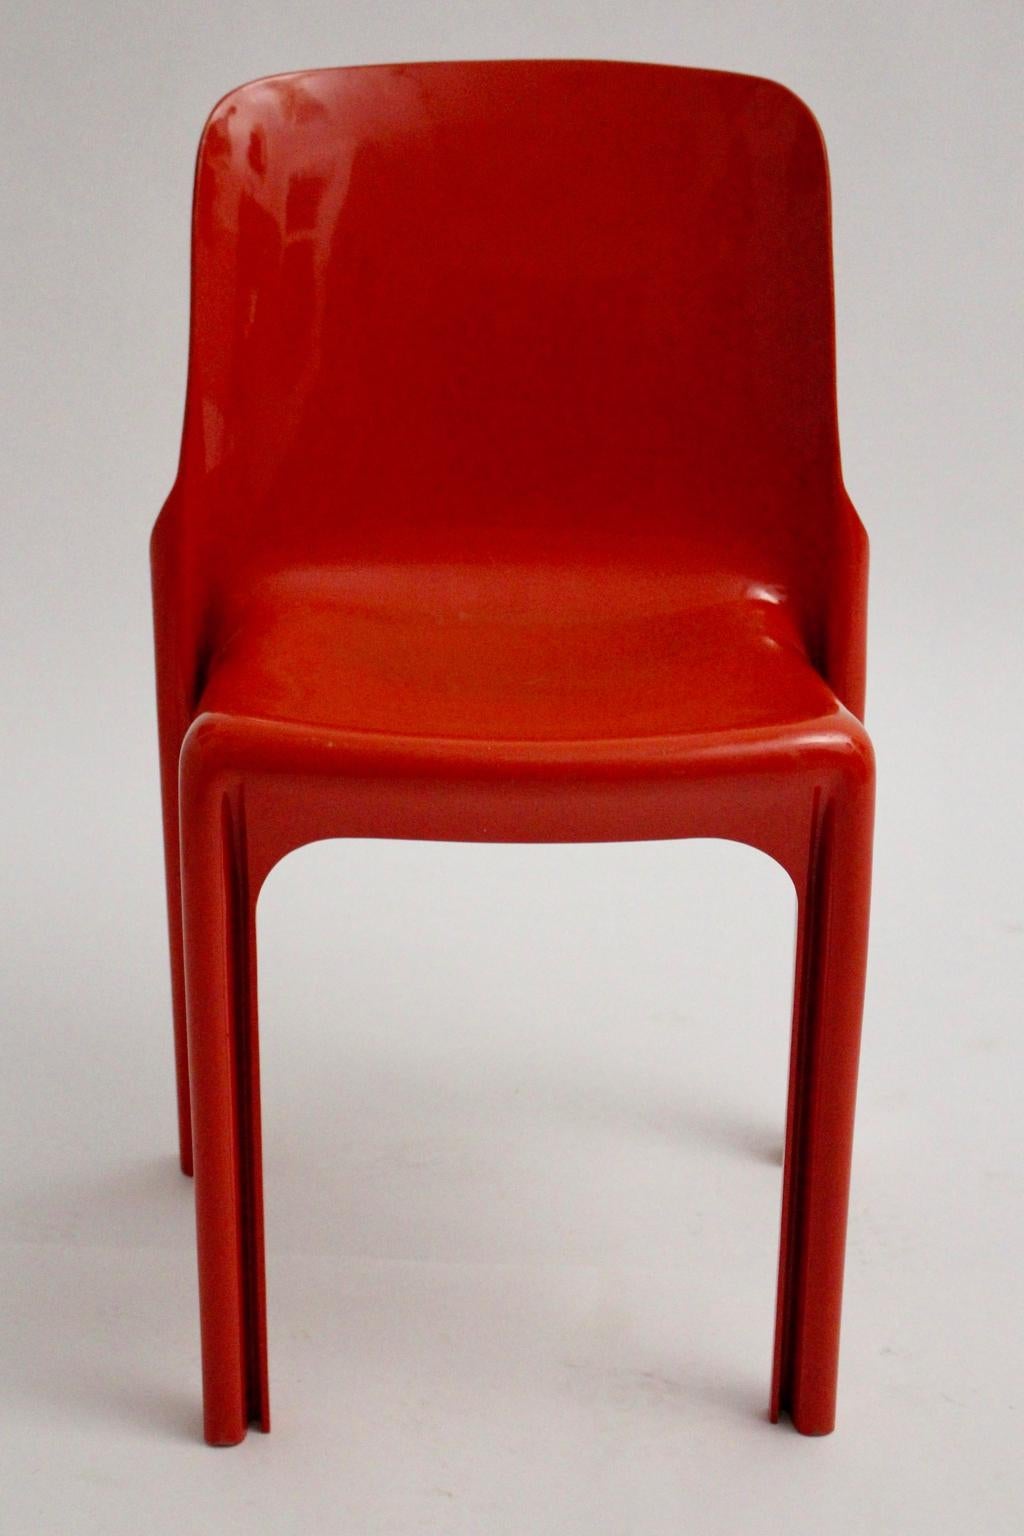 red plastic chairs